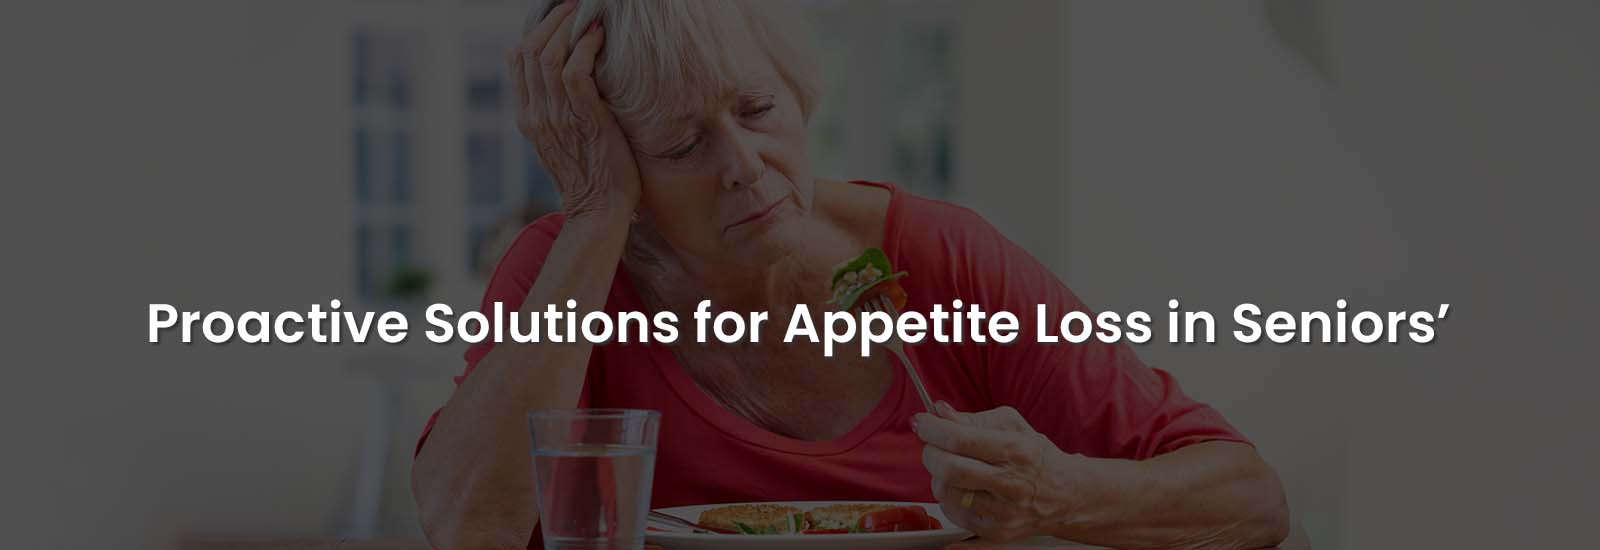 Proactive Solutions for Appetite Loss in Seniors | Banner Image